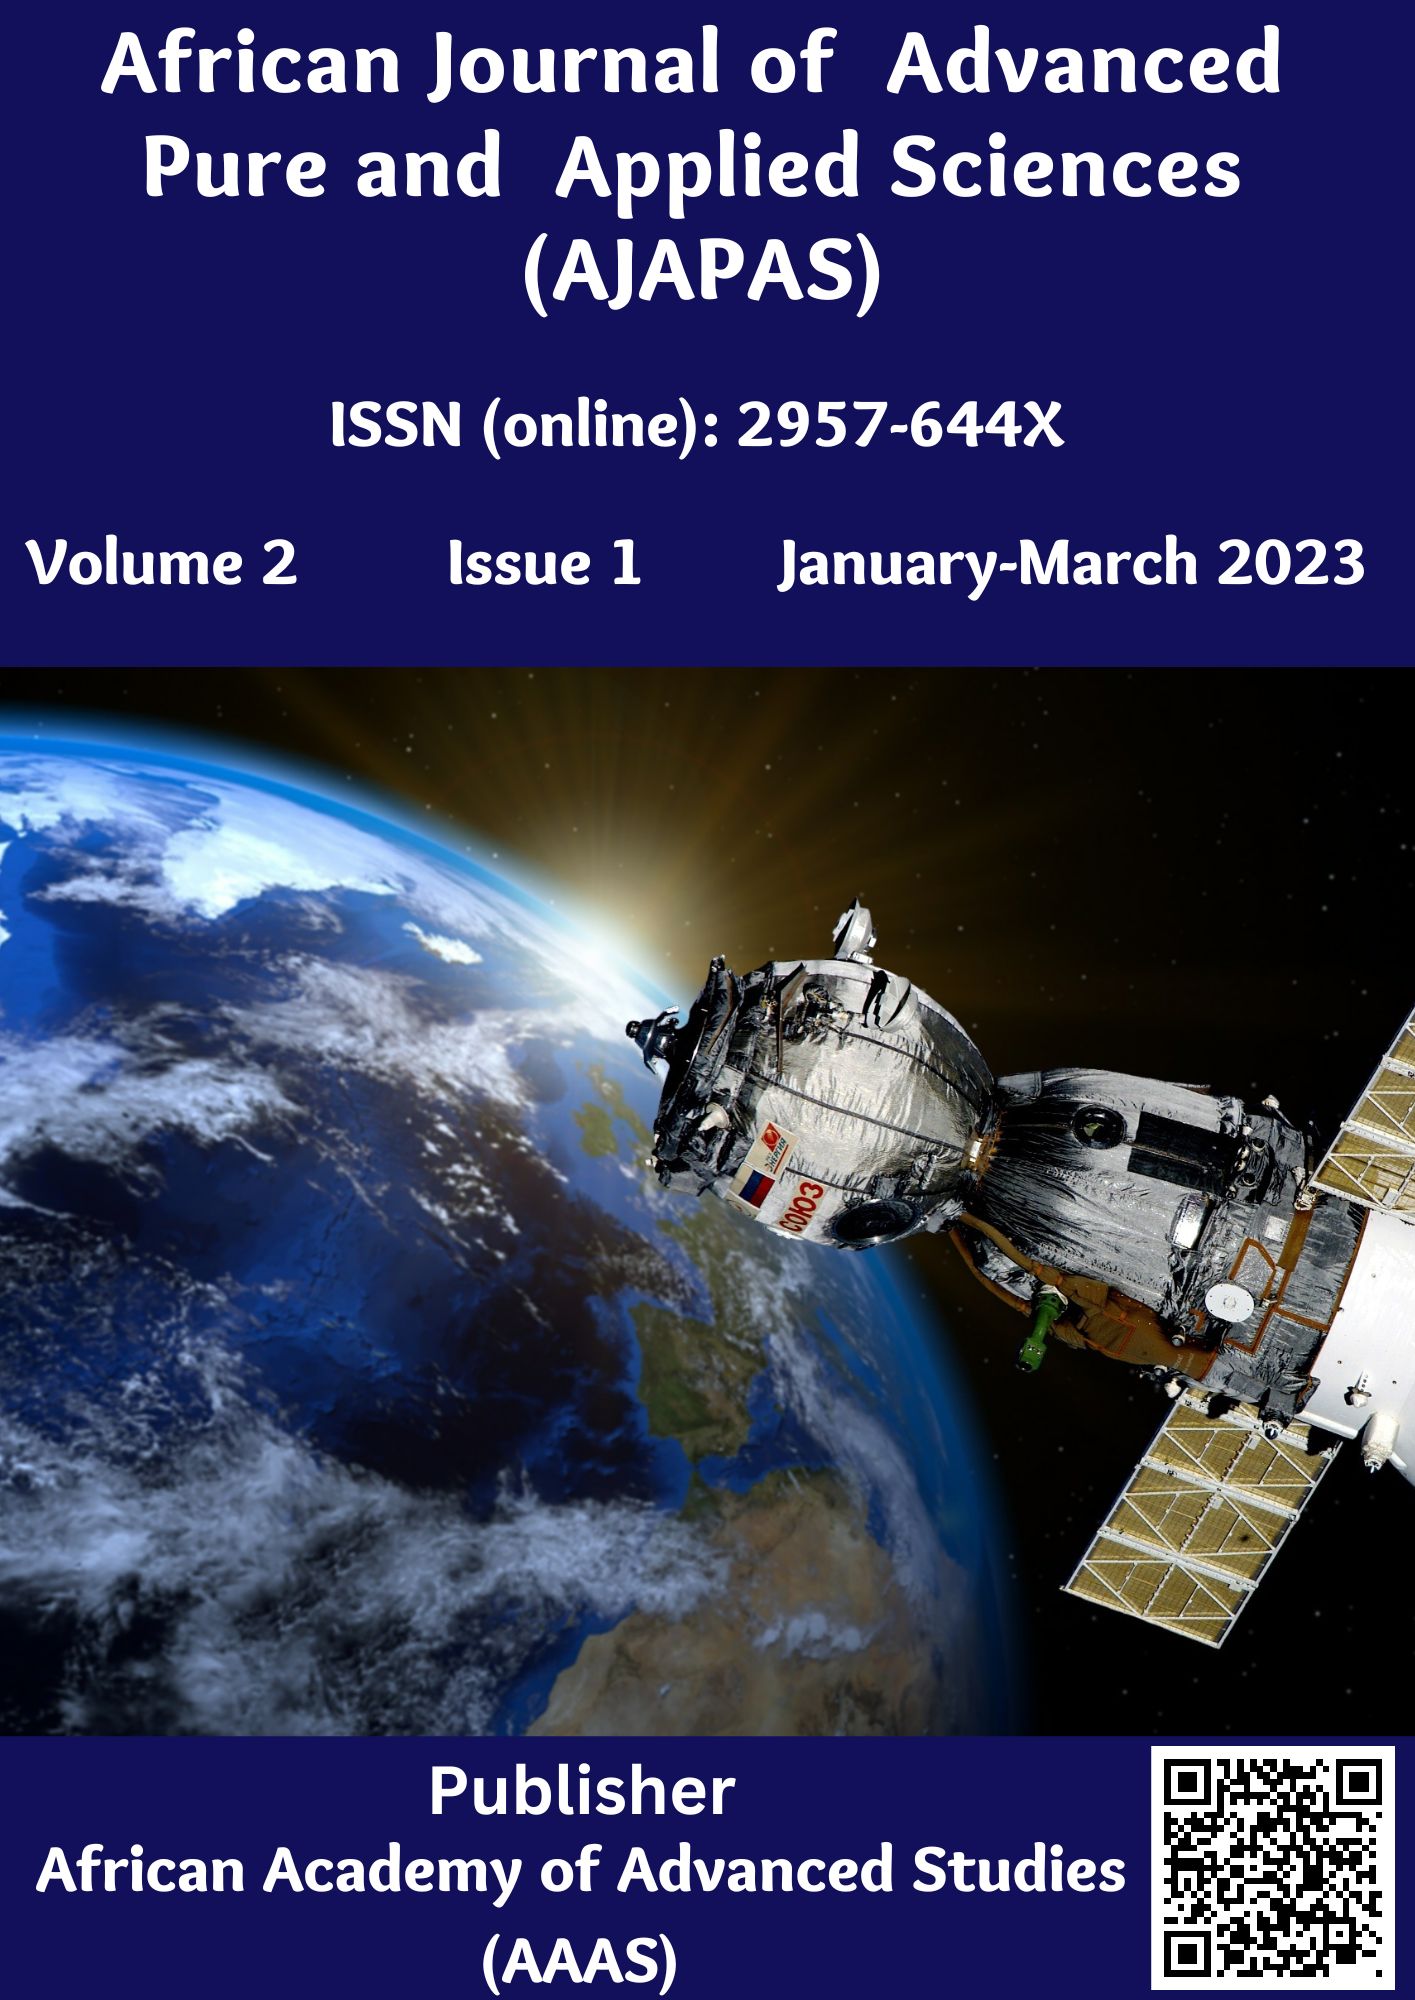 					View Volume 2, Issue 1, January-March 2023
				